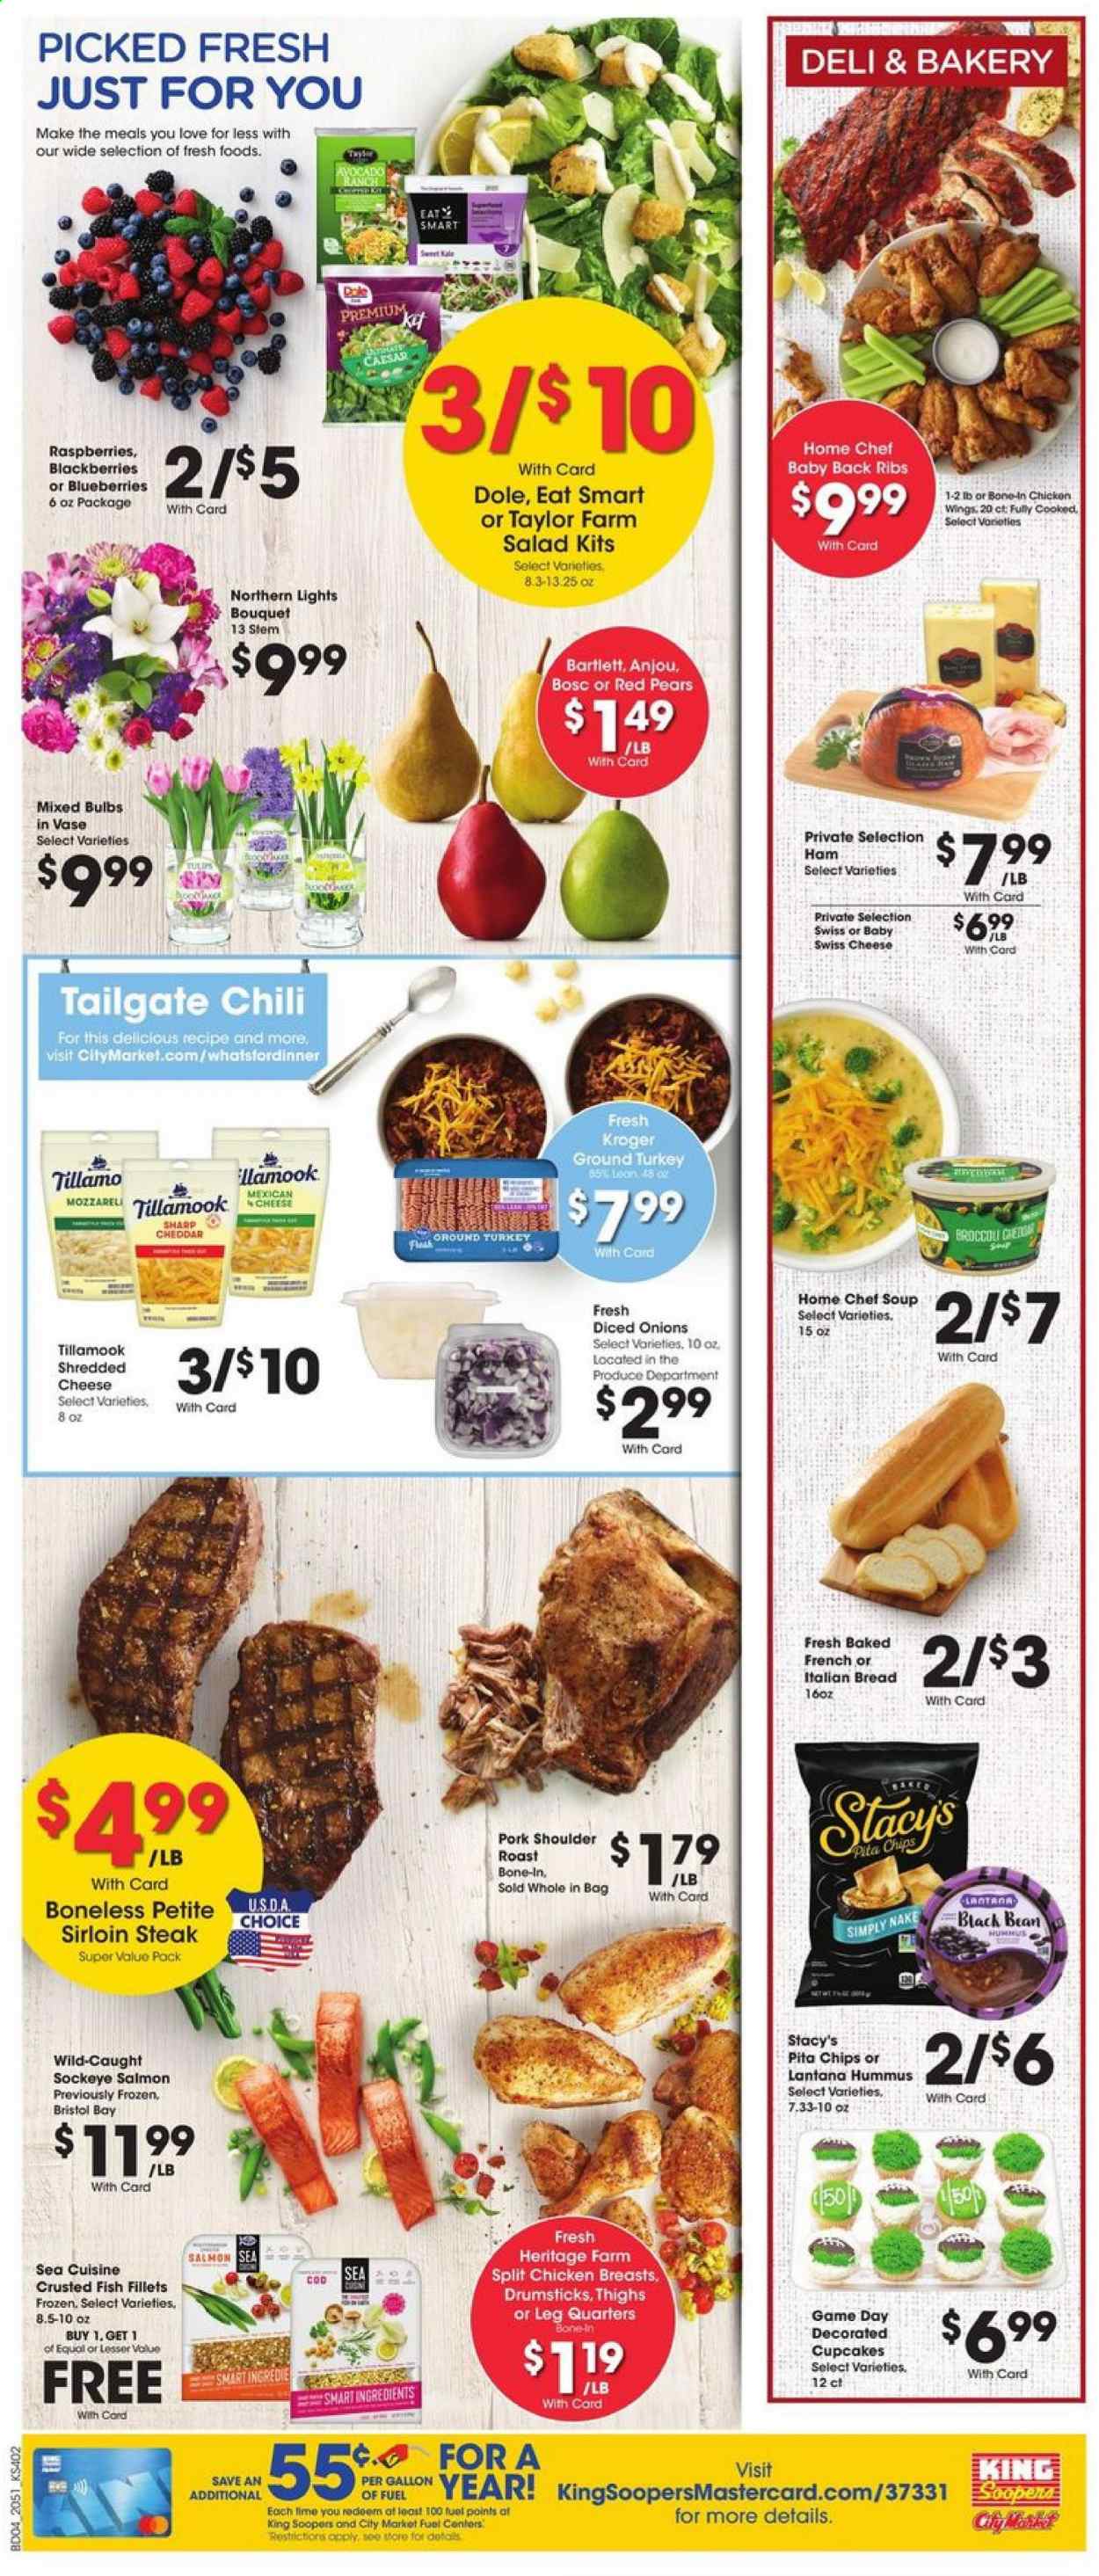 thumbnail - City Market Flyer - 01/20/2021 - 01/26/2021 - Sales products - blackberries, blueberries, raspberries, Dole, bread, cupcake, pears, cod, fish fillets, salmon, fish, soup, salad, ham, hummus, swiss cheese, cheddar, cheese, beans, ground turkey, chicken breasts, beef sirloin, steak, sirloin steak, pork meat, pork roast, pork shoulder, pork back ribs, Sharp, bulb, tulip, bouquet. Page 6.